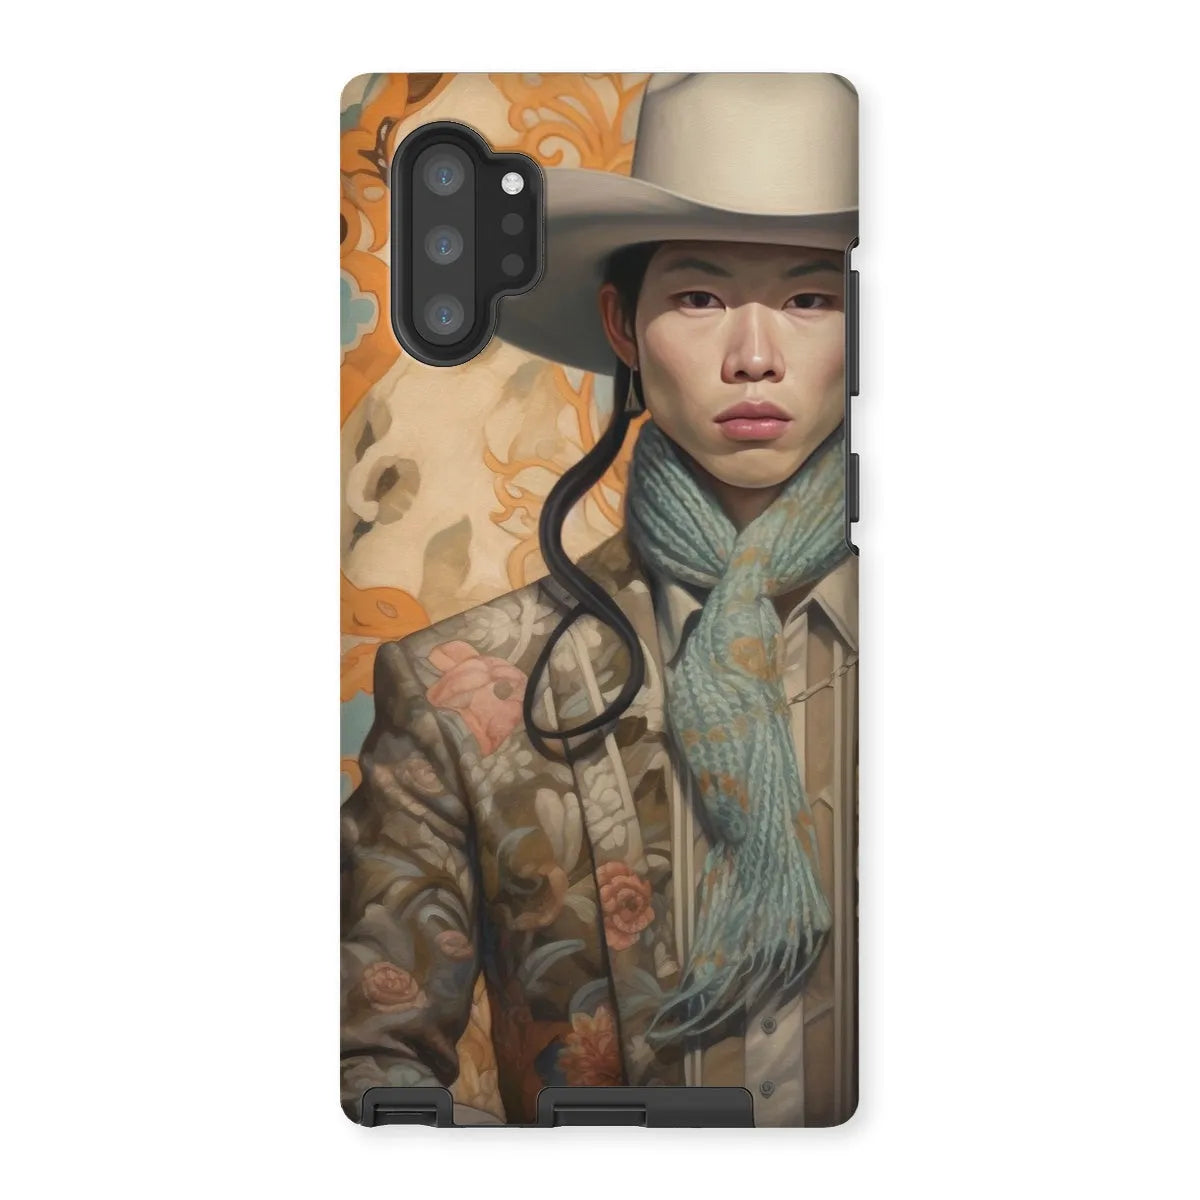 Baihu The Gay Cowboy - Gay Aesthetic Art Phone Case - Samsung Galaxy Note 10p / Matte - Mobile Phone Cases - Aesthetic